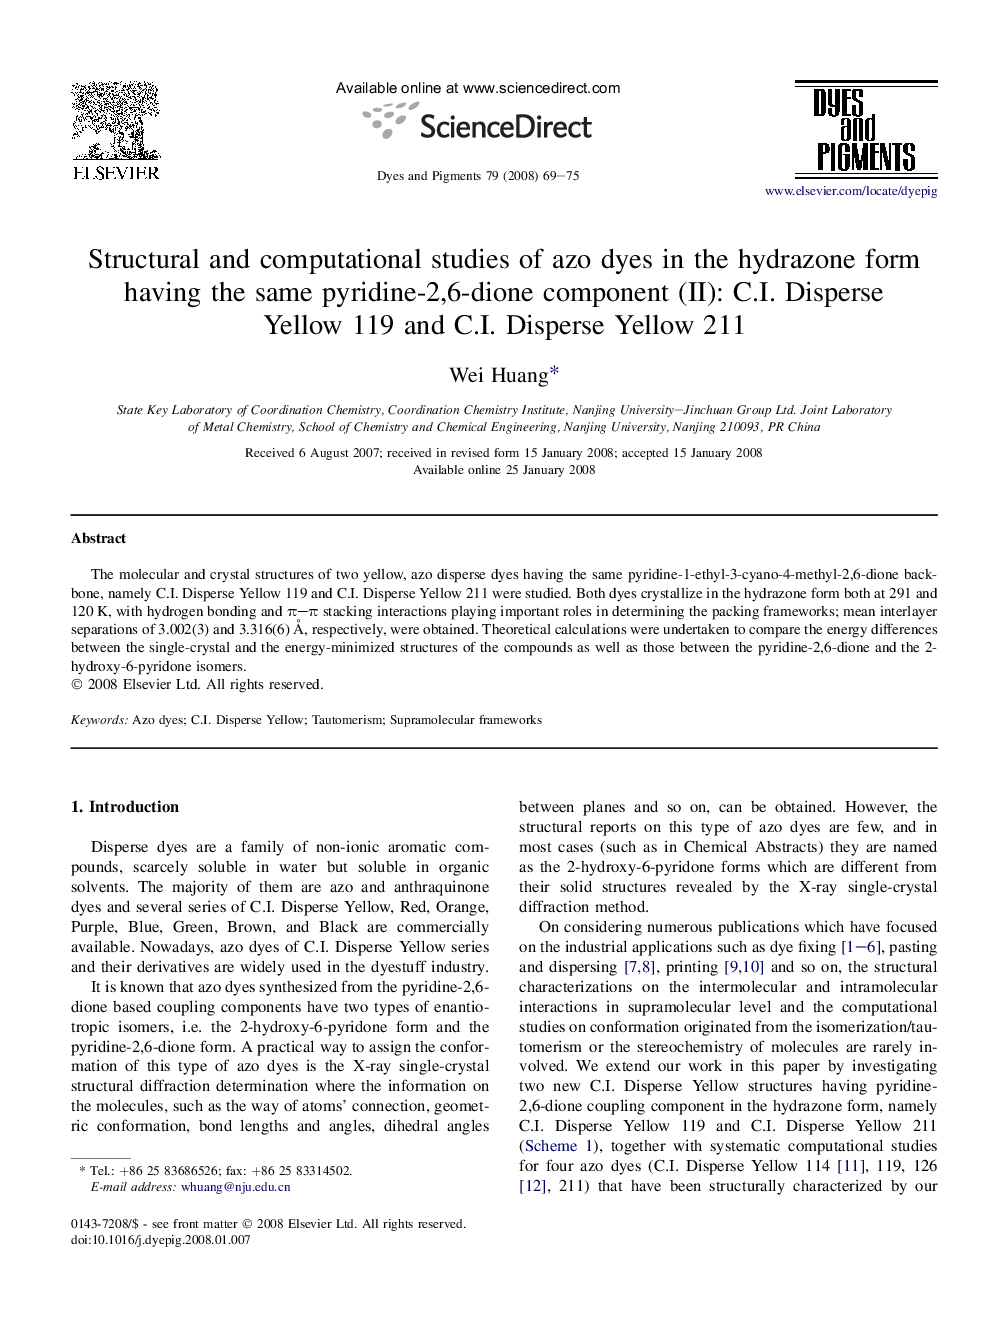 Structural and computational studies of azo dyes in the hydrazone form having the same pyridine-2,6-dione component (II): C.I. Disperse Yellow 119 and C.I. Disperse Yellow 211